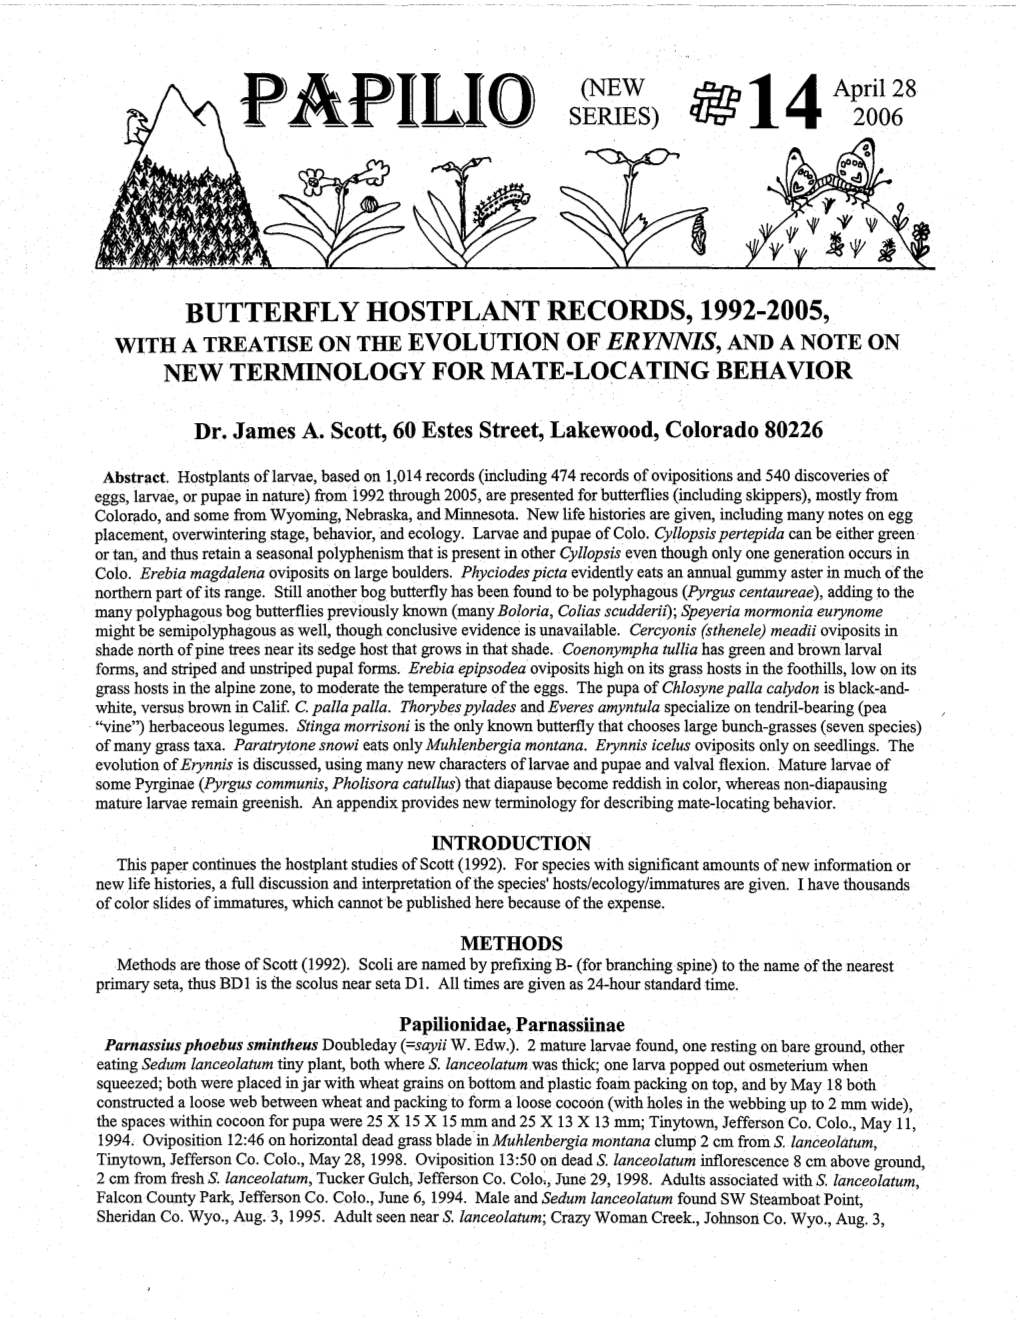 Butterfly Hostplant Records, 1992-2005, with a Treatise on the Evolution of Erynnis, and a Note on New Terminology for Mate-Locating Behavior